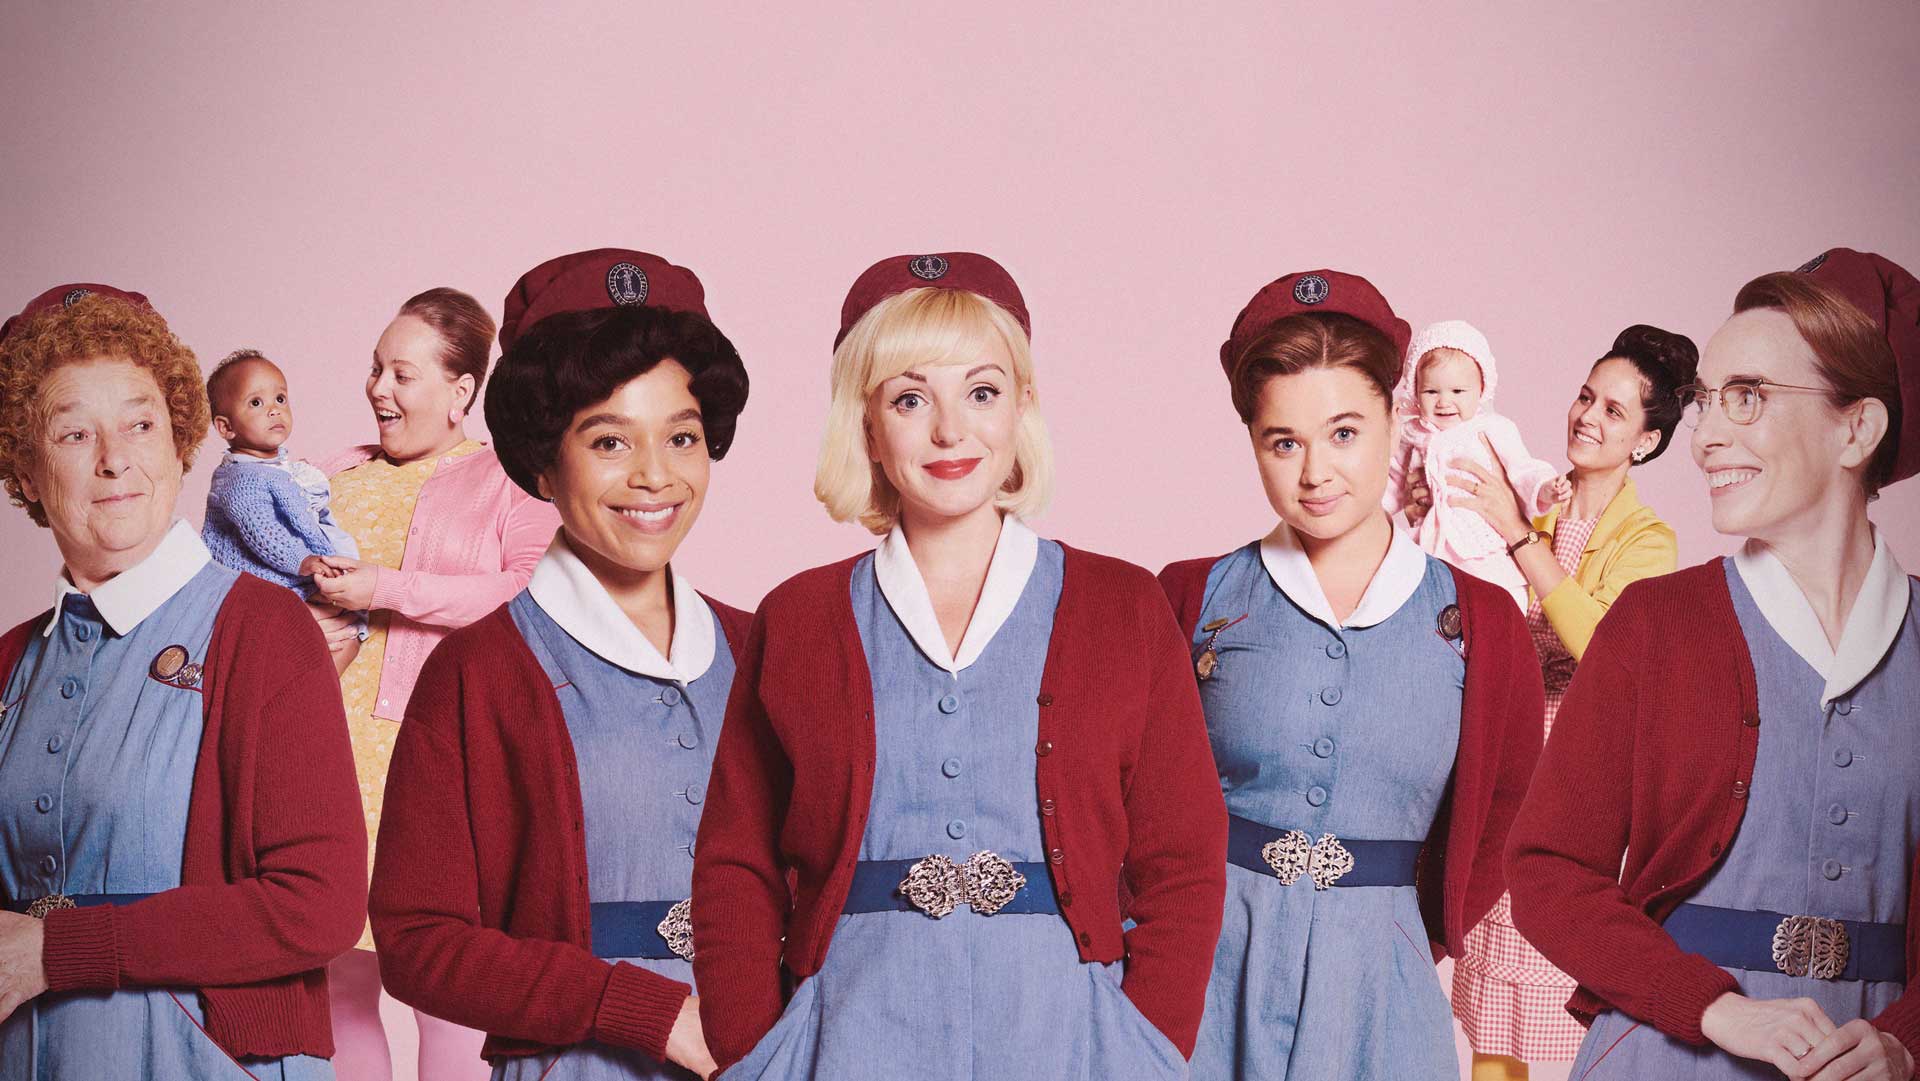 New babies, midwives, and challenges as Nonnatus house gears up for 1967. <i>Call the Midwife</i>, the acclaimed, multi-award-winning drama returns to <i>PBS 6</i> for an 11th season, March 20 at 8 p.m.